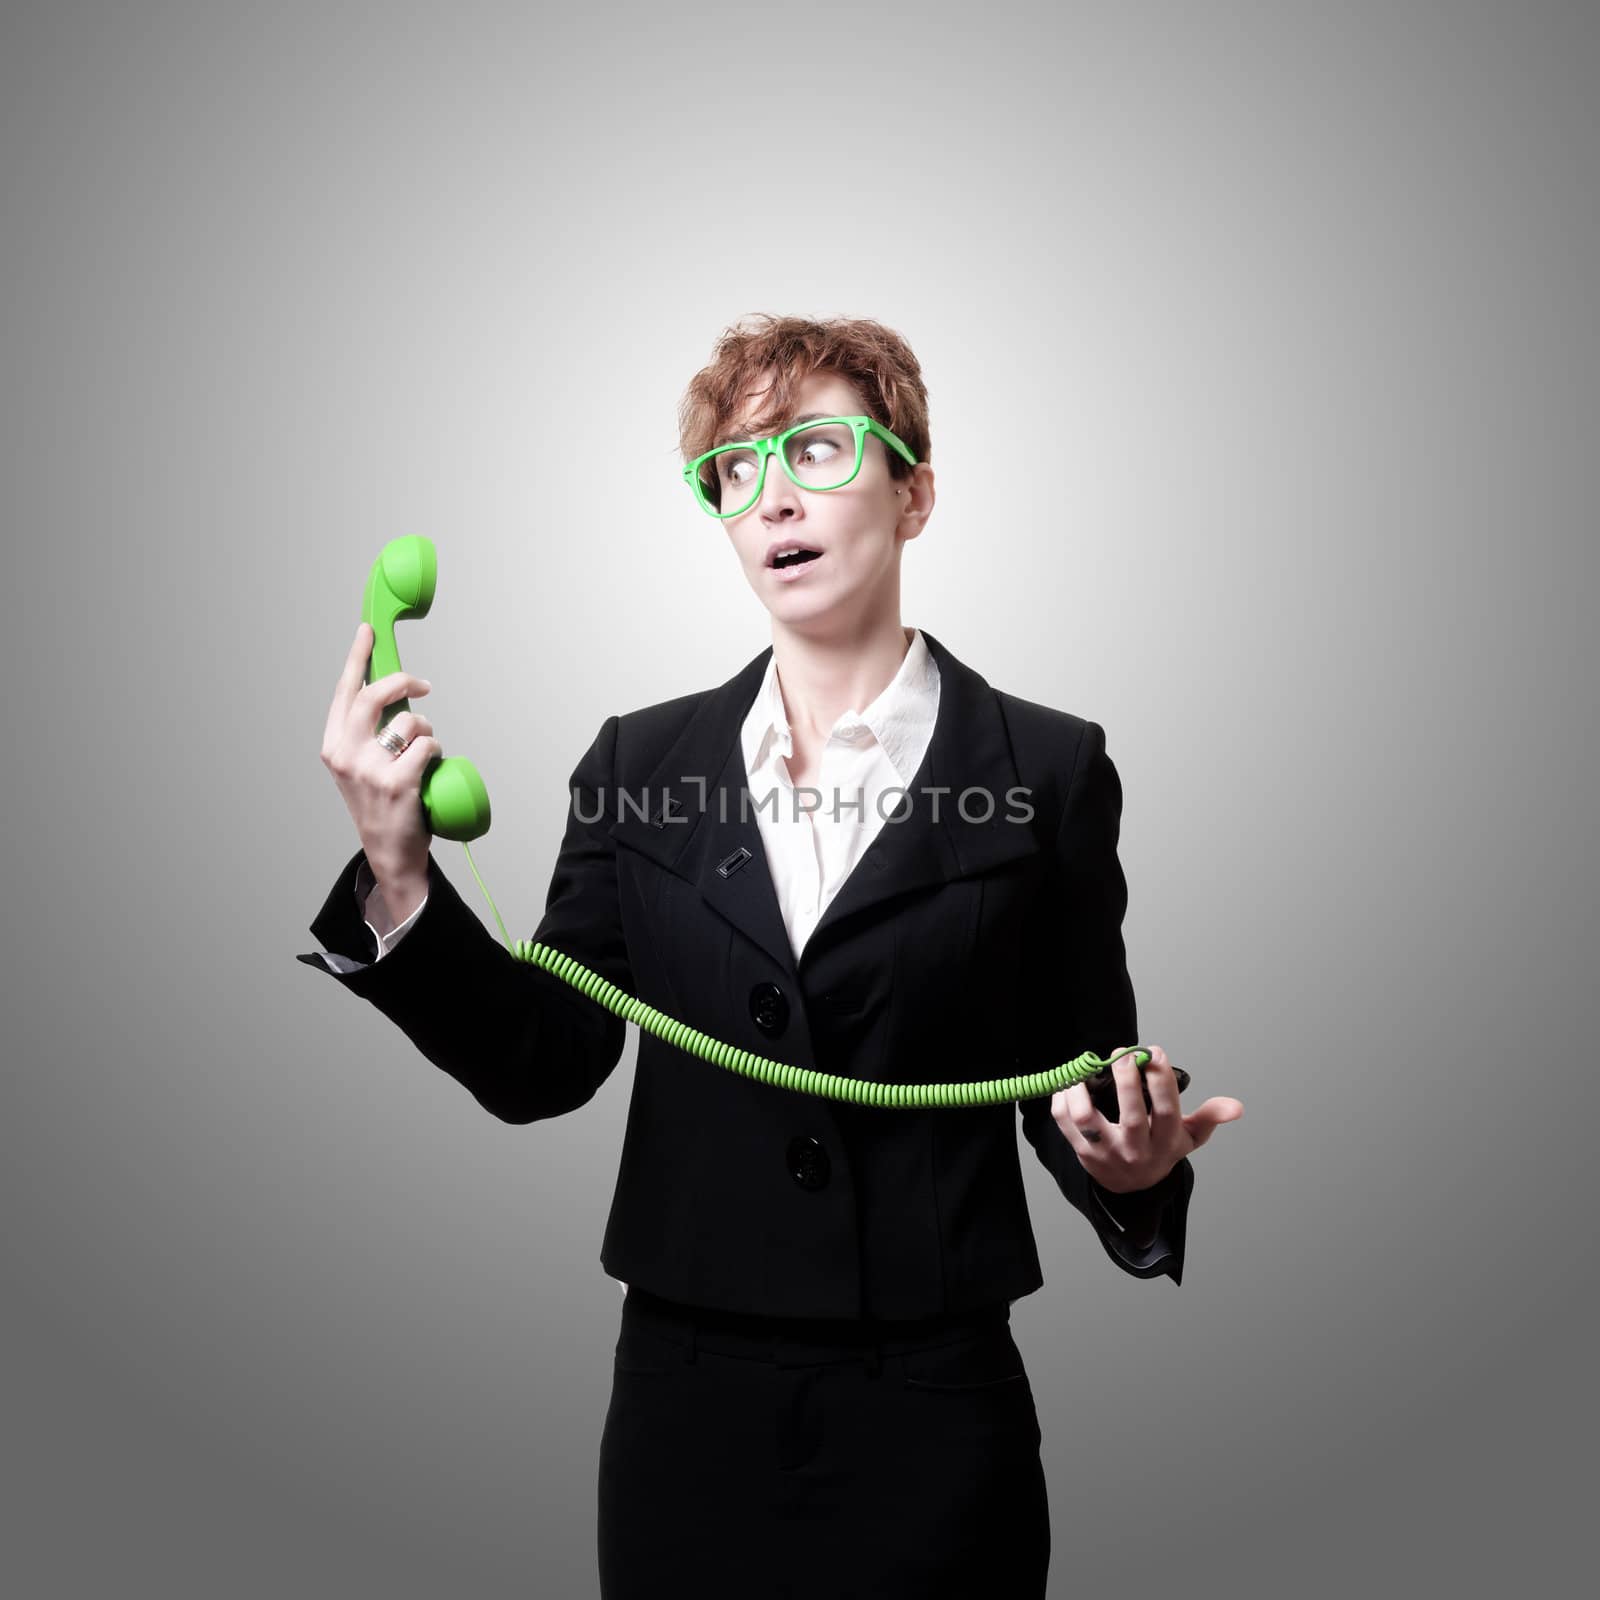 surprised business woman with phone on gray background